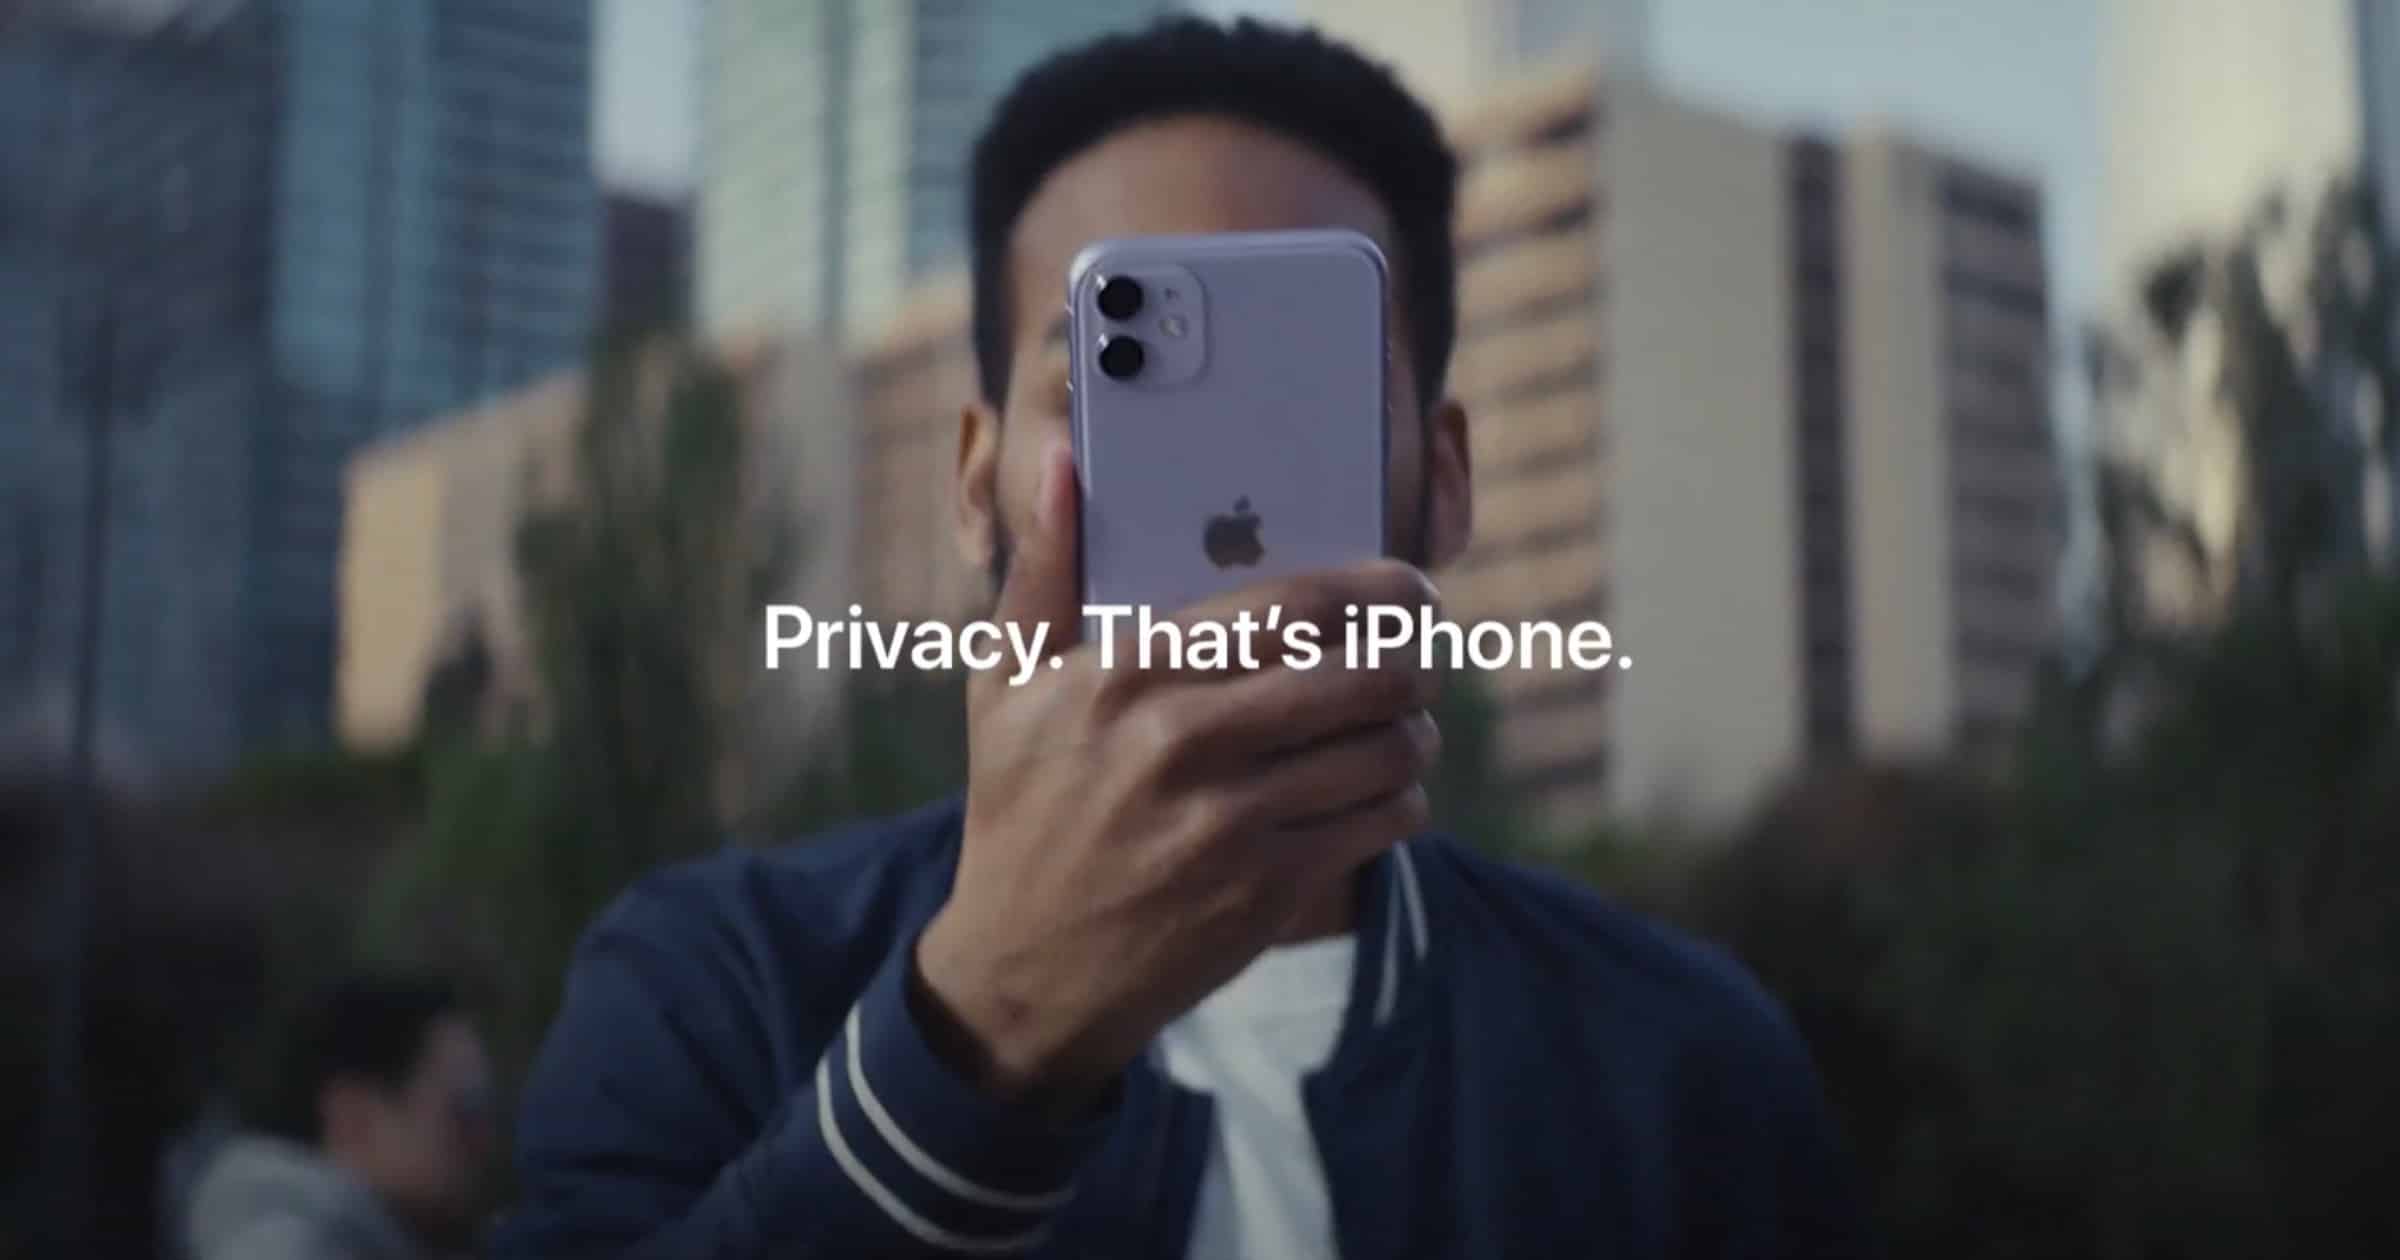 Apple’s New ‘Over Sharing’ Video Ad is a Failure